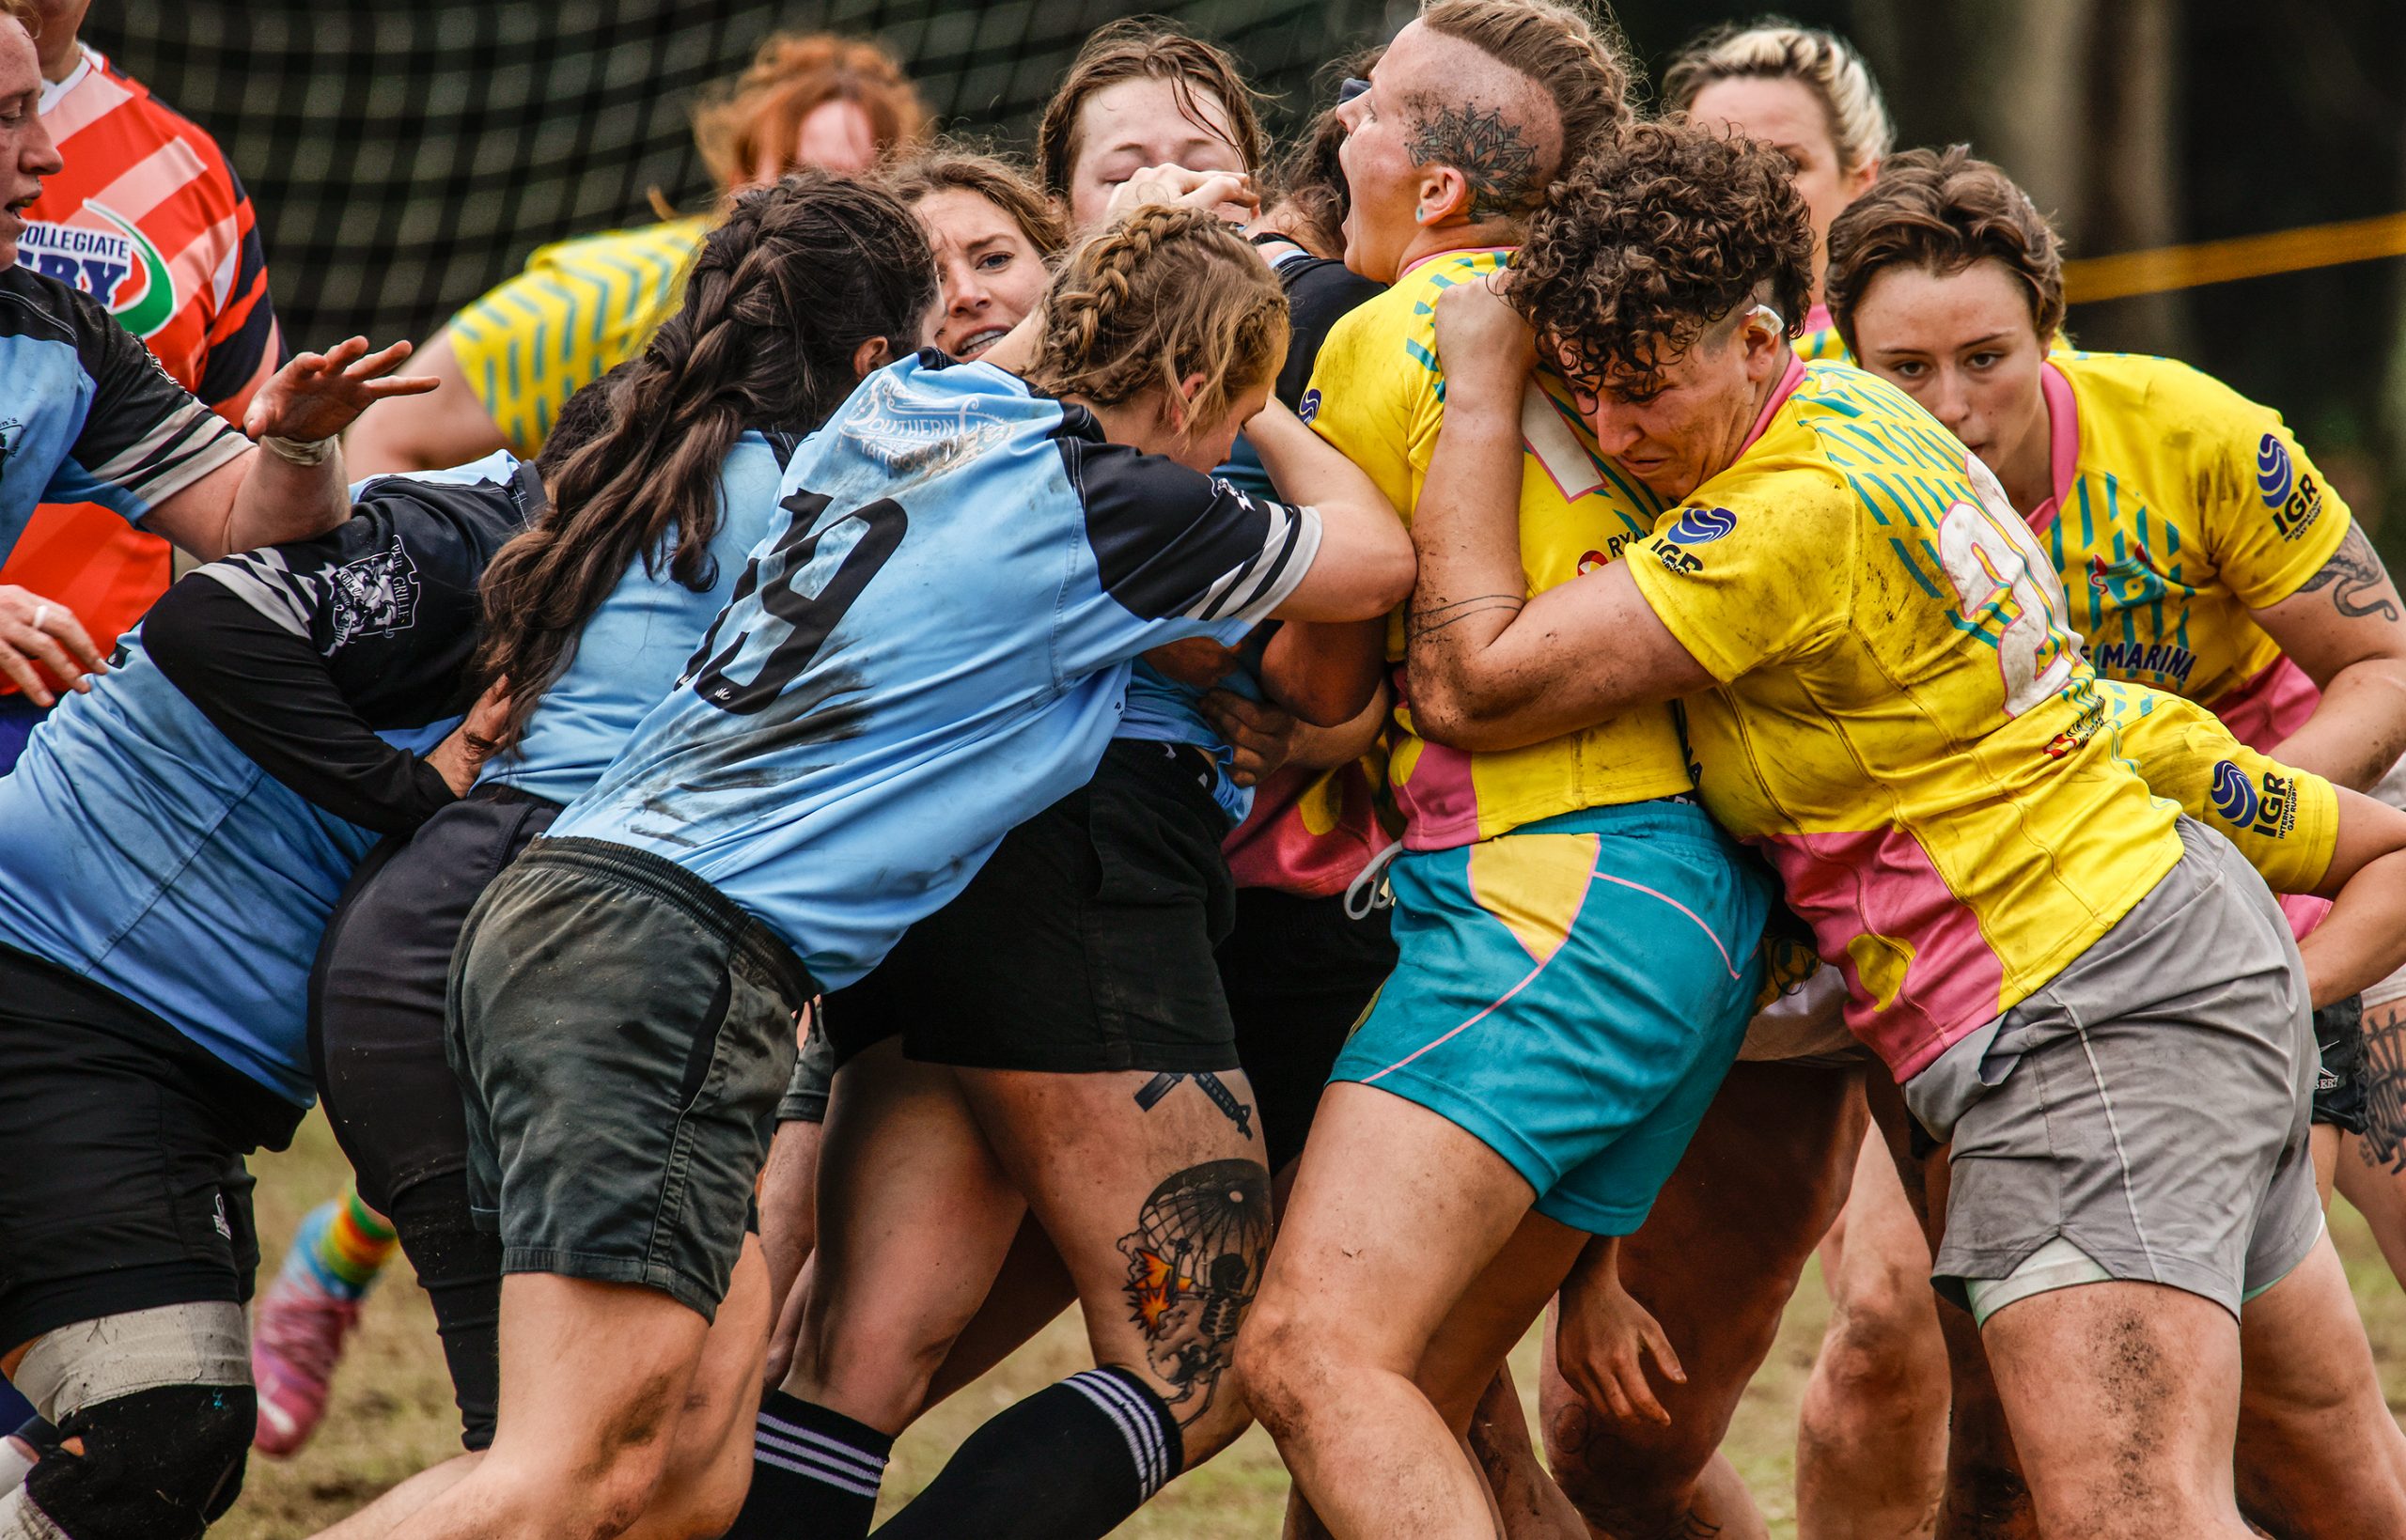 Rugby is a game of true grit and physical endurance. This photo captures the passion and determination on each player’s face during an intense moment of the game. 
